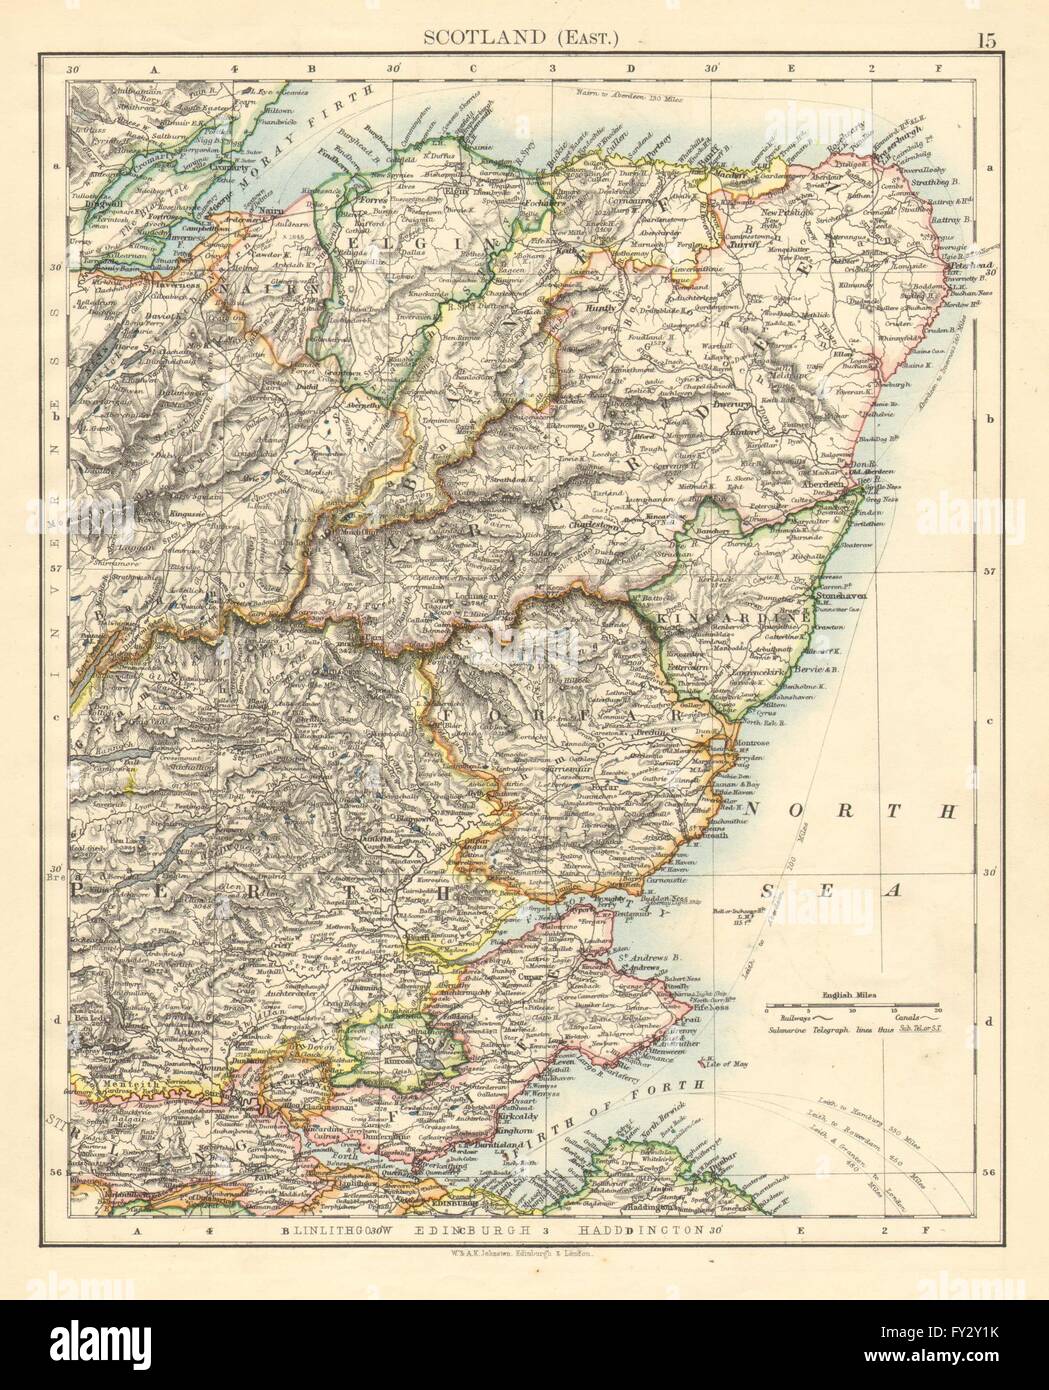 SCOTLAND EAST. Grampian Tayside Fife Firth of Forth Aberdeen.JOHNSTON, 1899 map Stock Photo